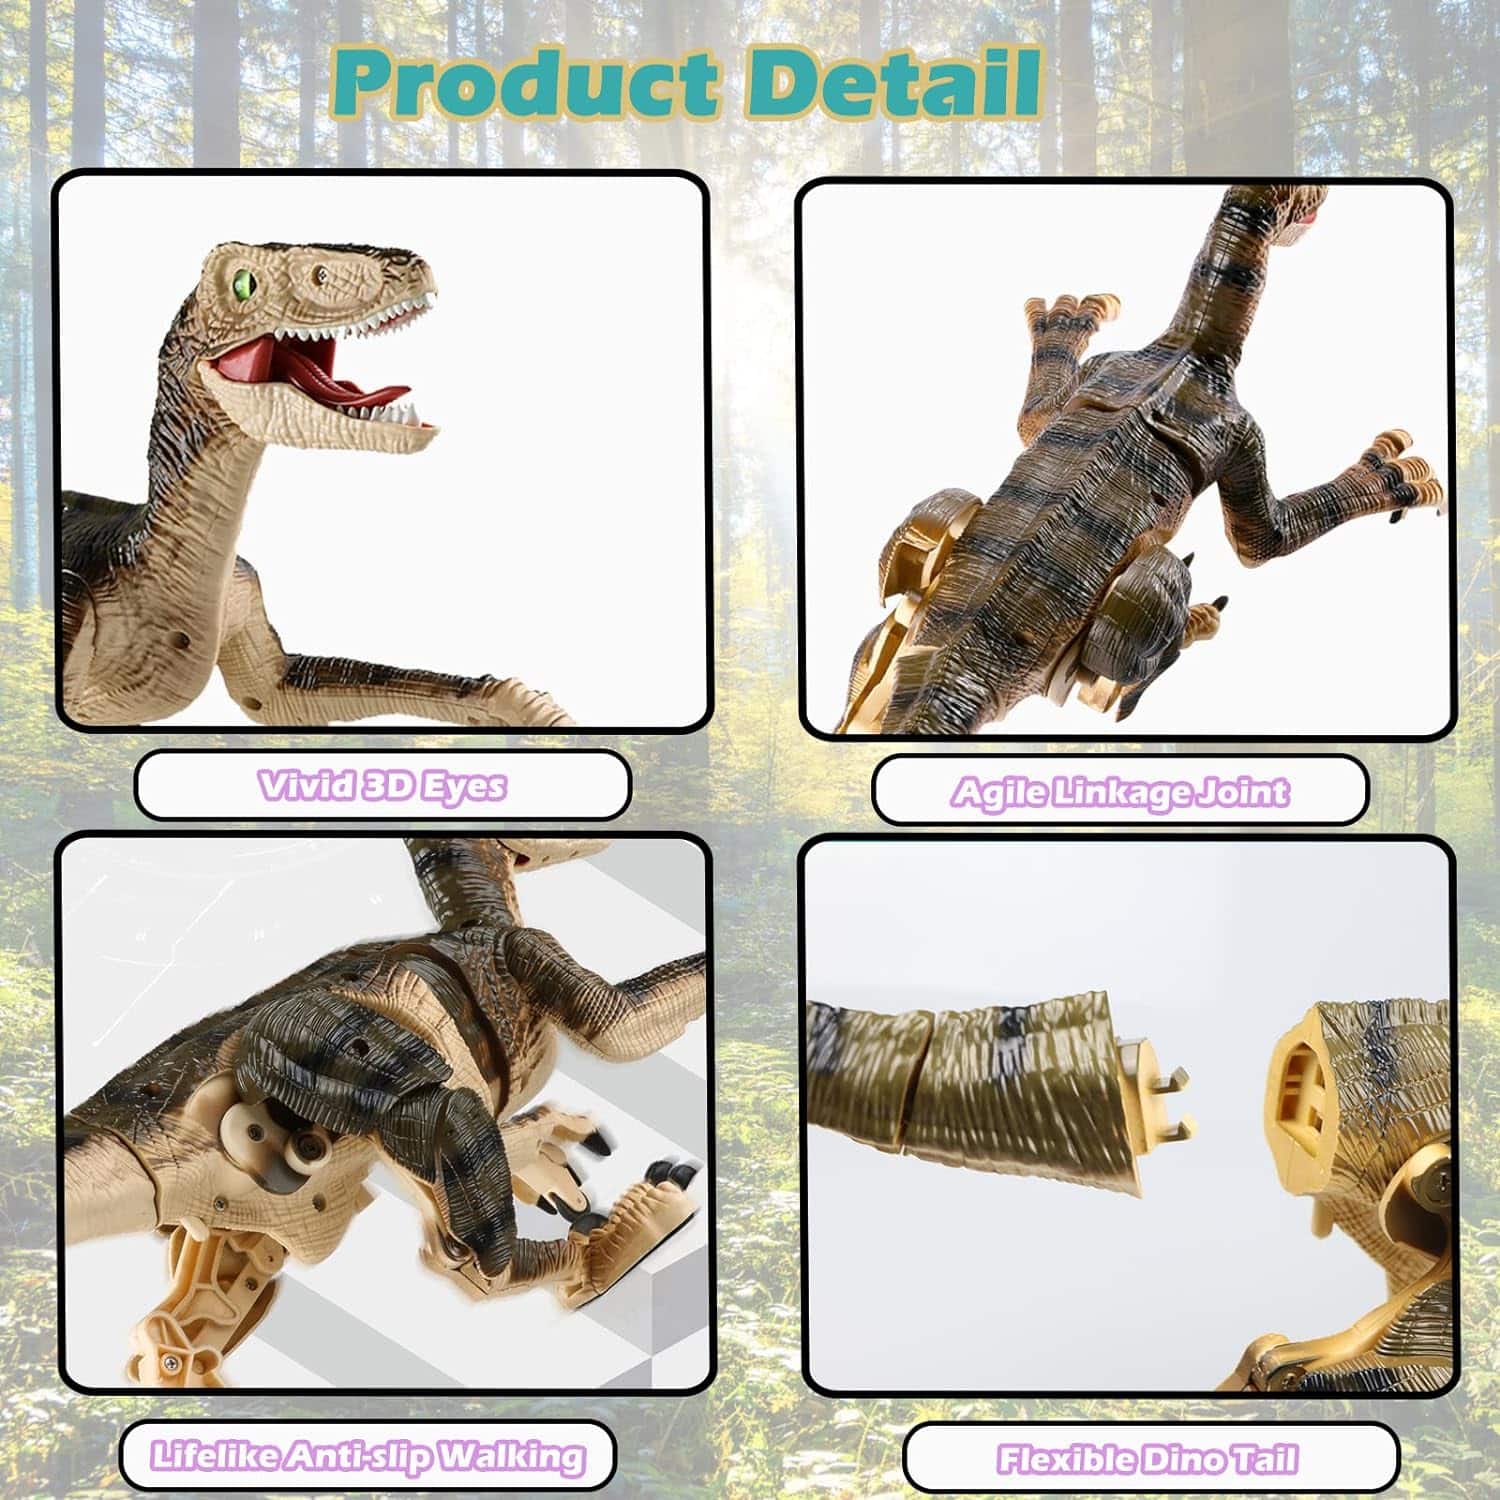 Trovono Remote Control Dinosaur Toy: A Roaring Review of Fun and Adventure